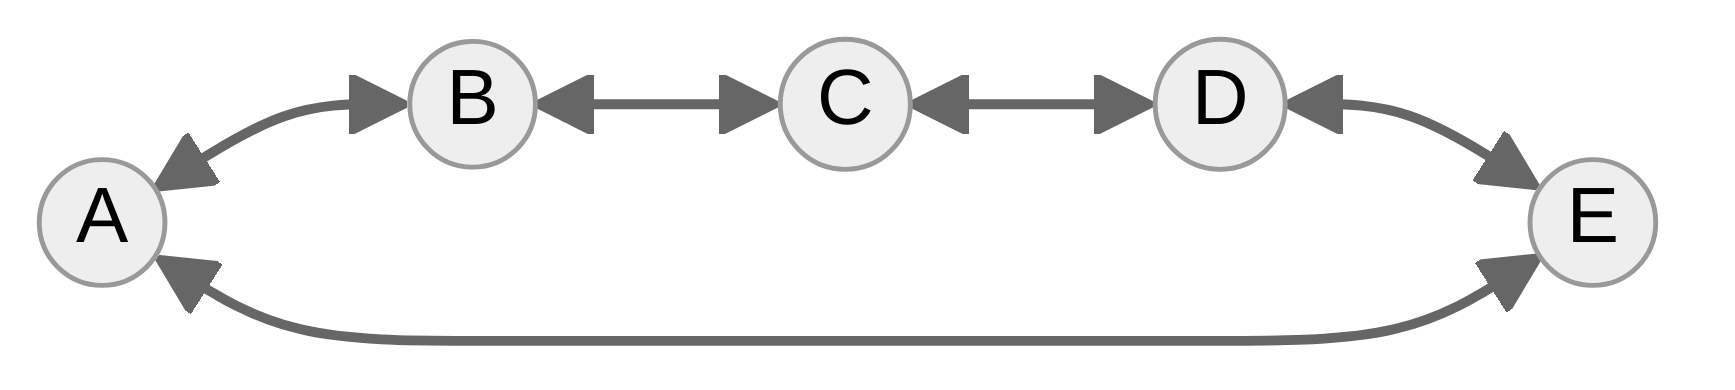 A flow chart showing five nodes, A through E, pointing to each other in a circle